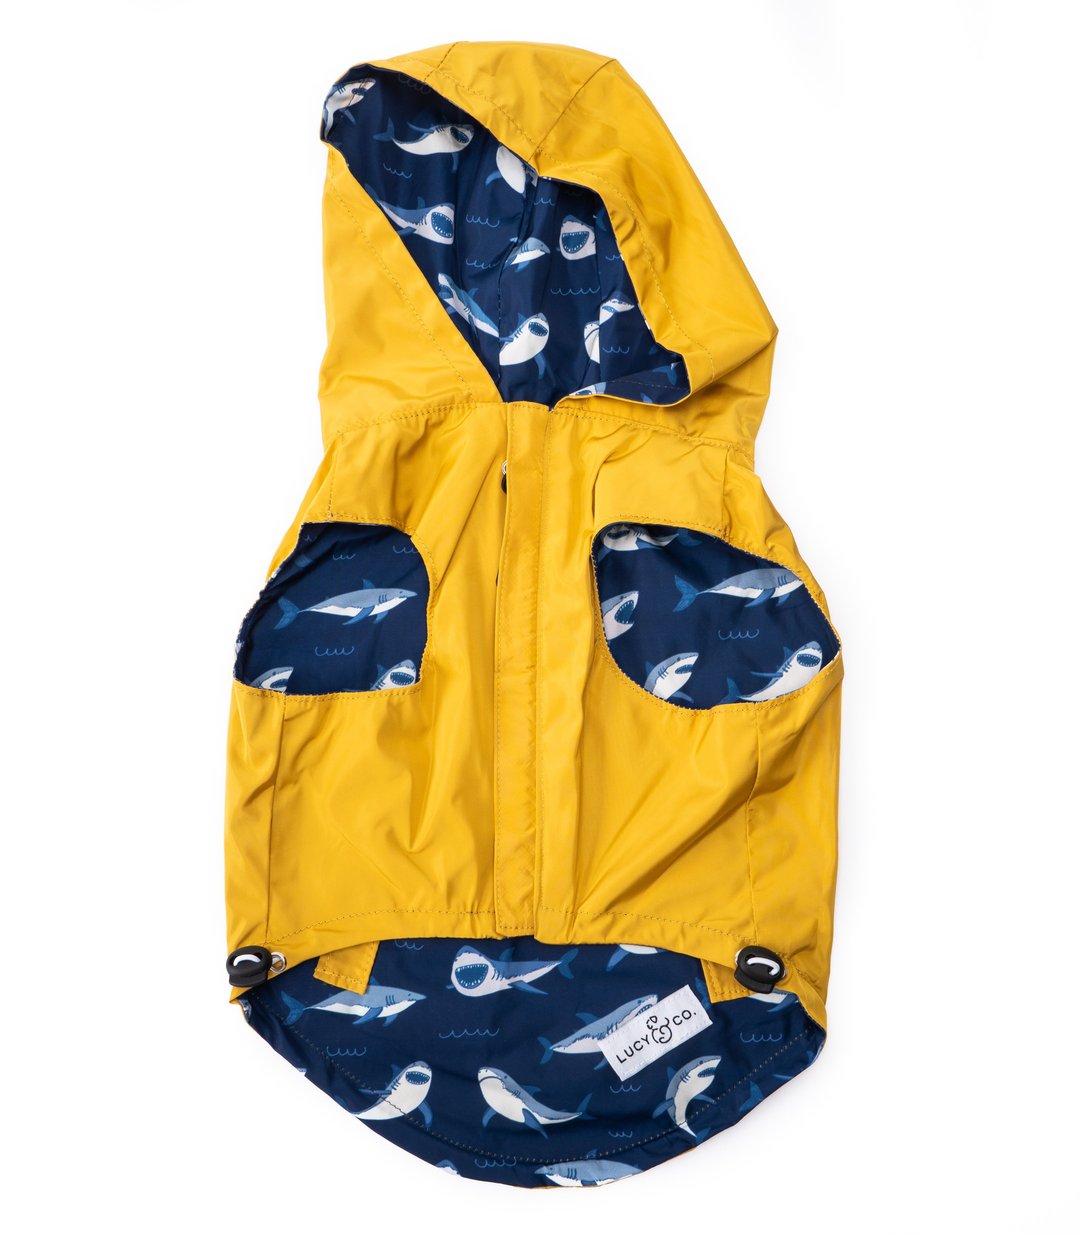 Lucy & Co. - Shark Attack Reversible Raincoat